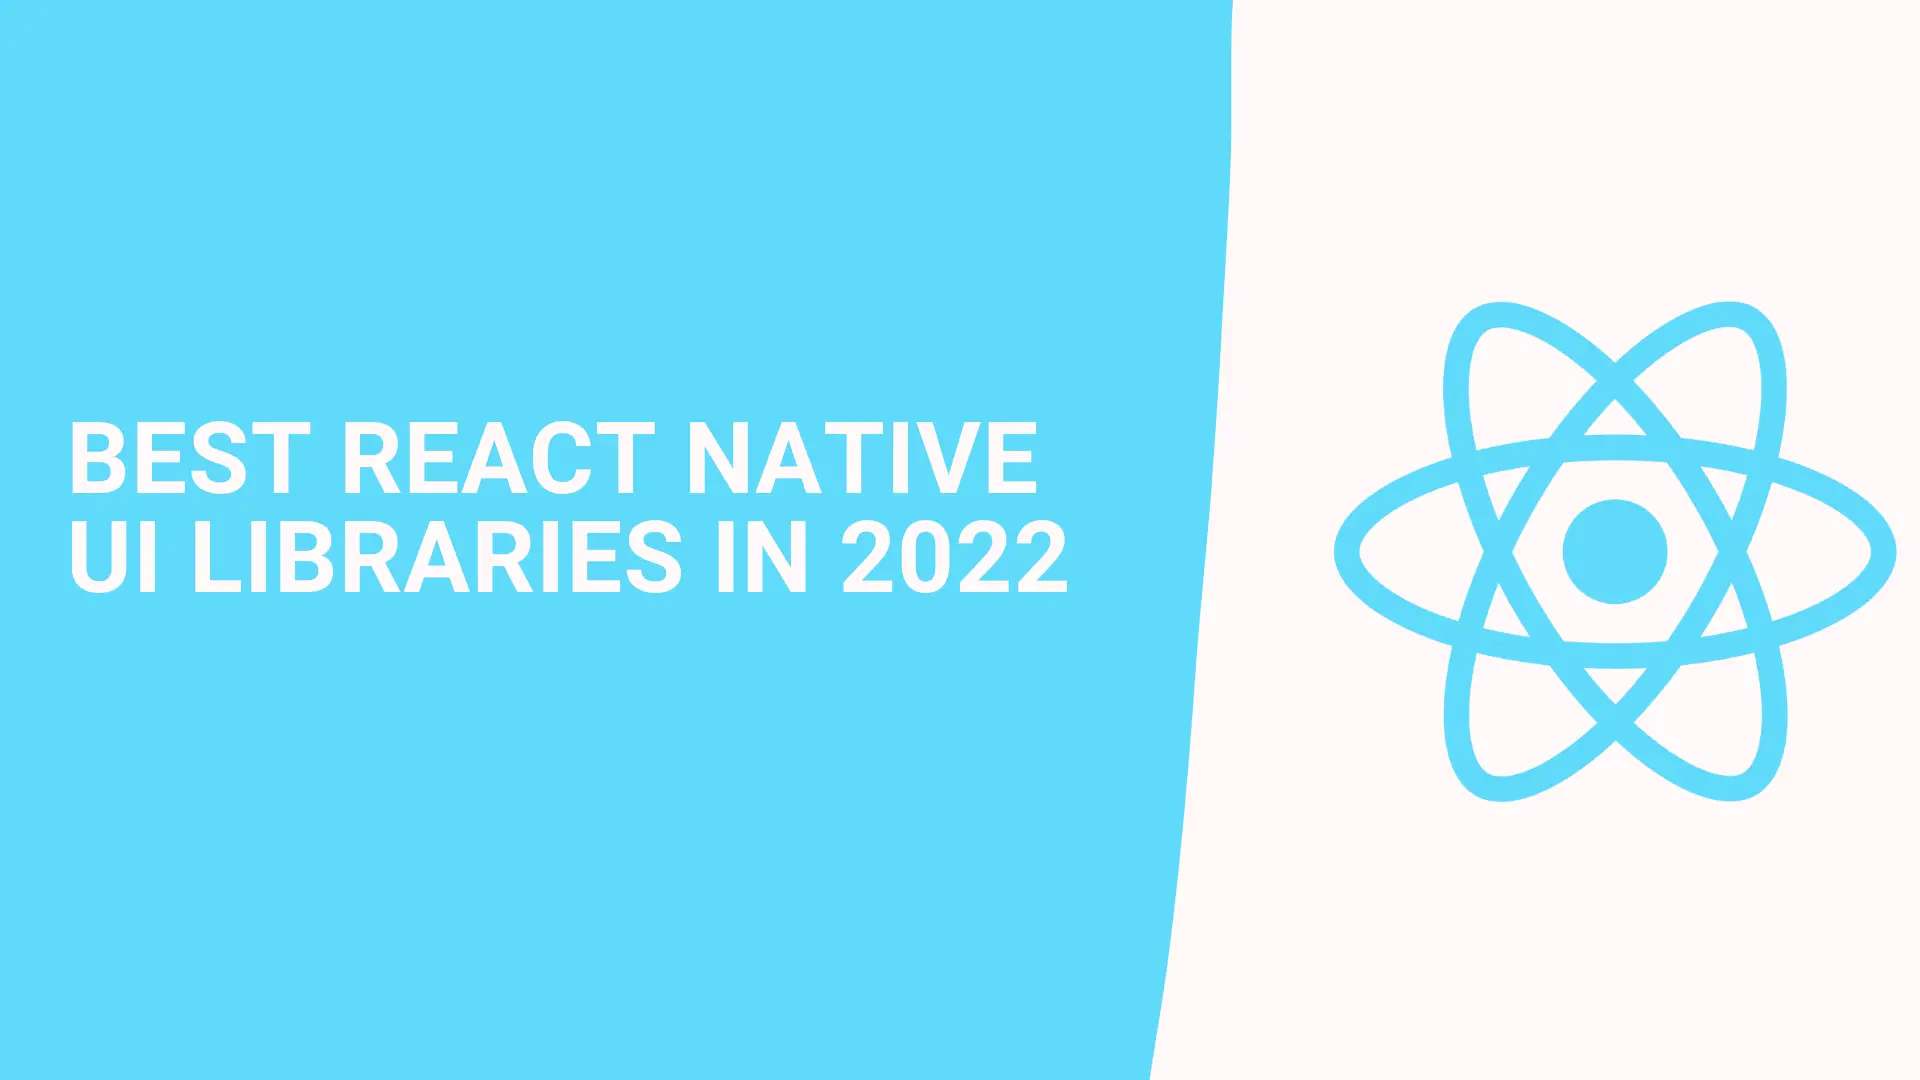 Best React Native UI Libraries in 2022